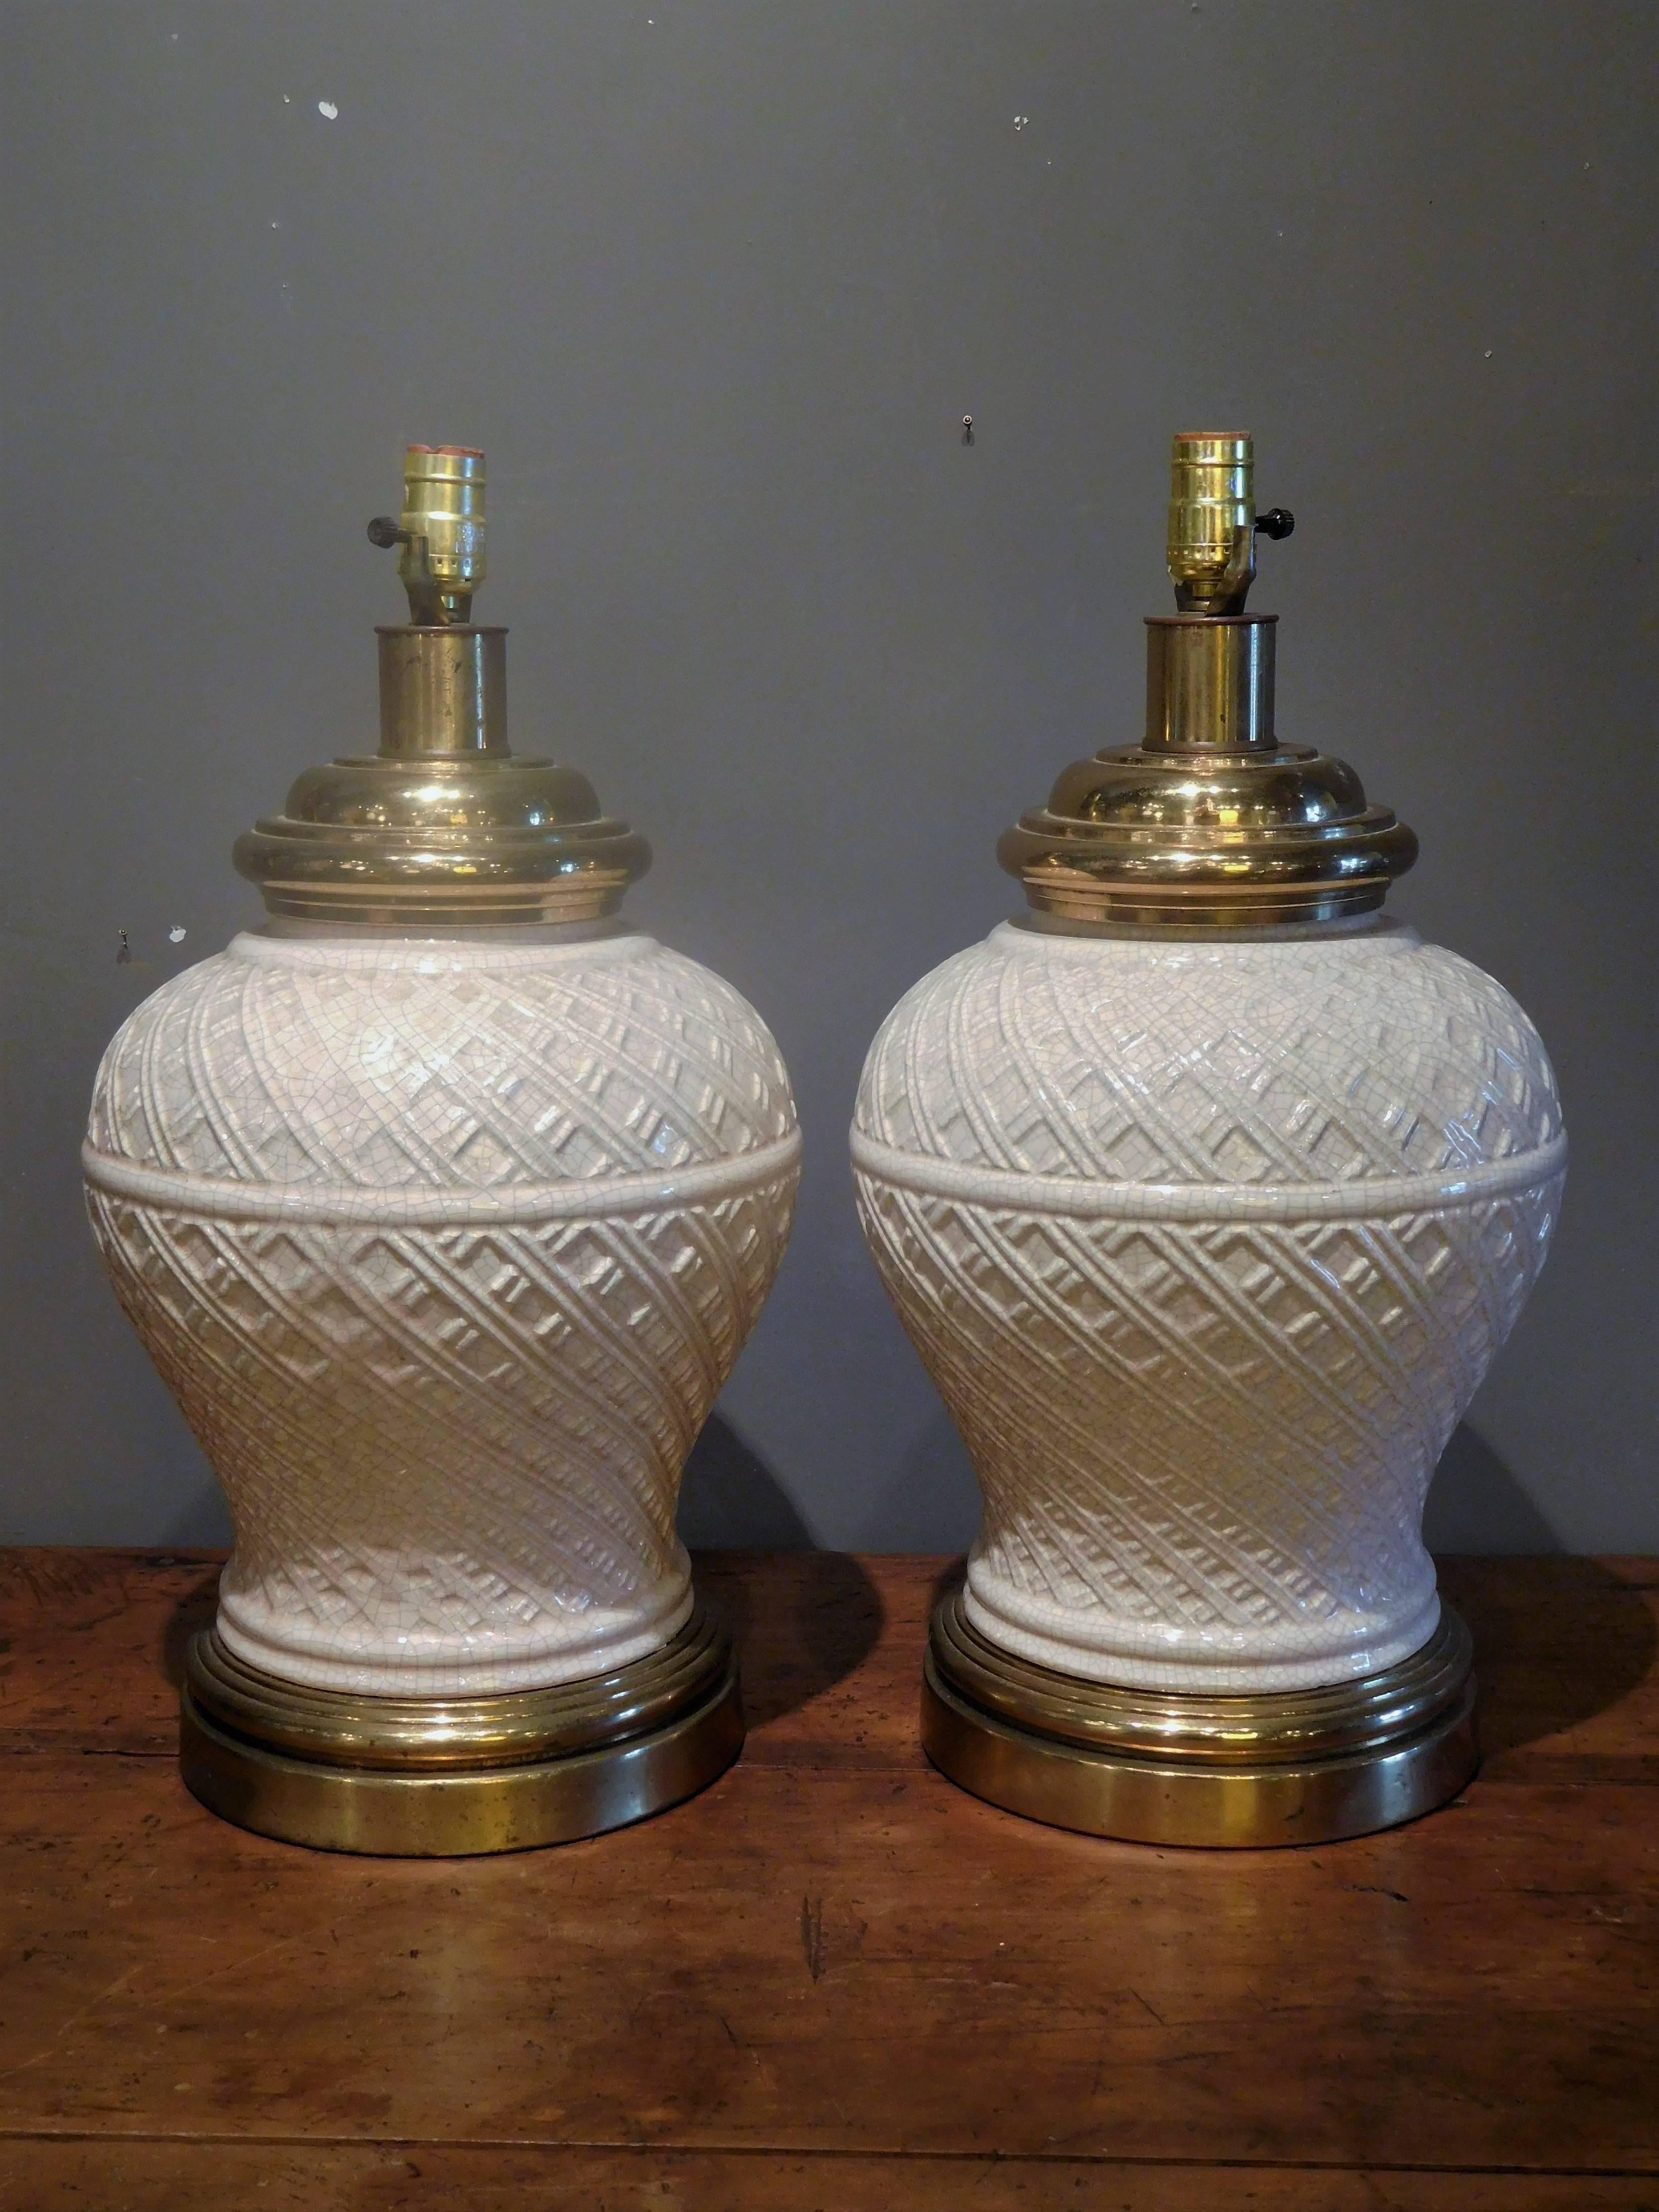 These ceramic and brass baluster-shaped lamps are attributed to the Paul Hanson Lighting Company, circa 1955. Inspired by traditional Chinese vessels, but upgraded in a modern basket-weave pattern, these lamps are mounted on brass plinth bases and